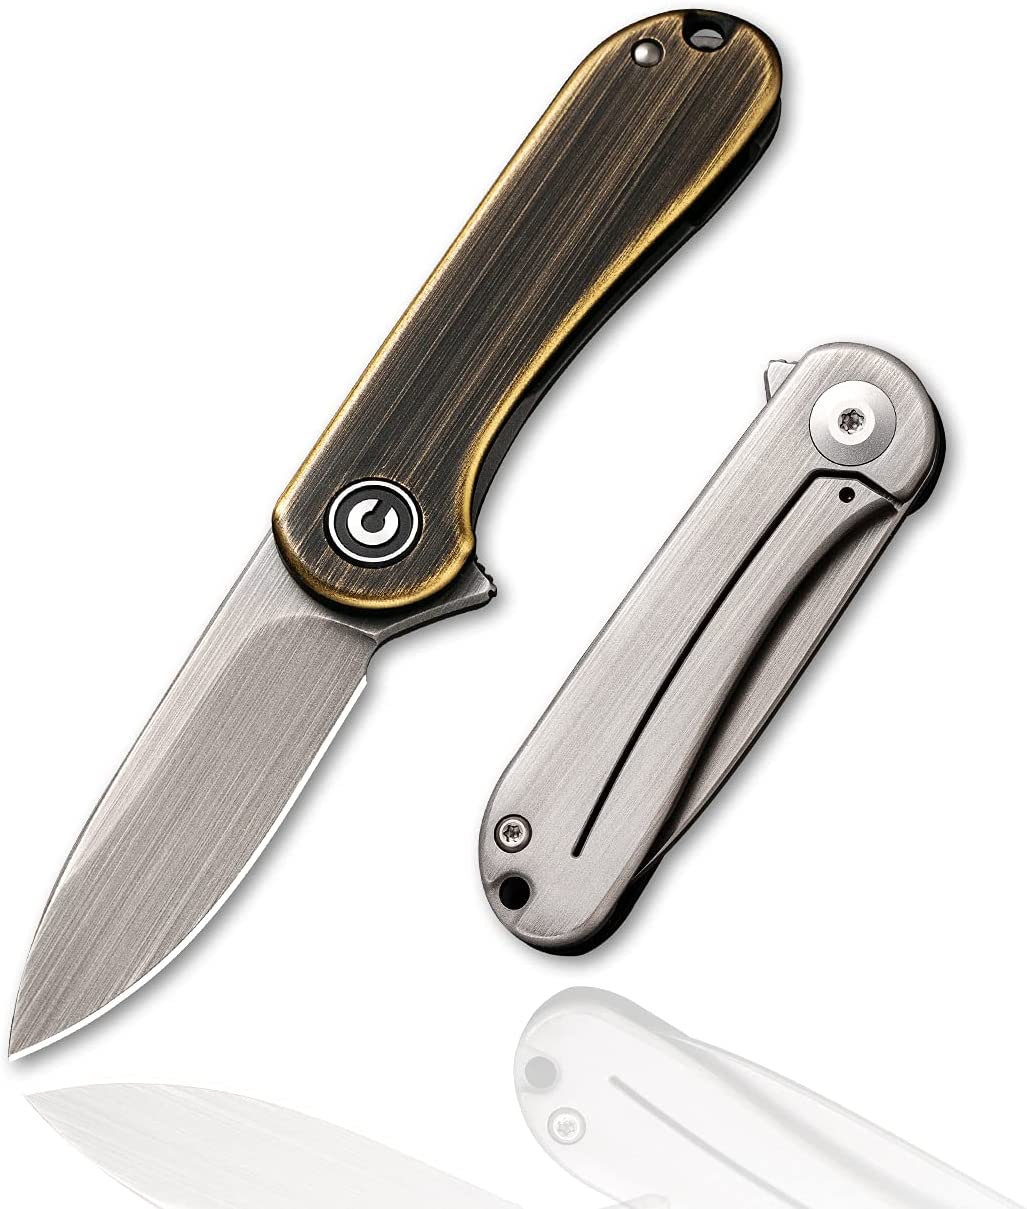 CIVIVI Mini Elementum Flipper Pocket Knife , Small folding Knife with 1.83" 14C28N Blade, Brass and Stainless Steel Handle C18062Q-1